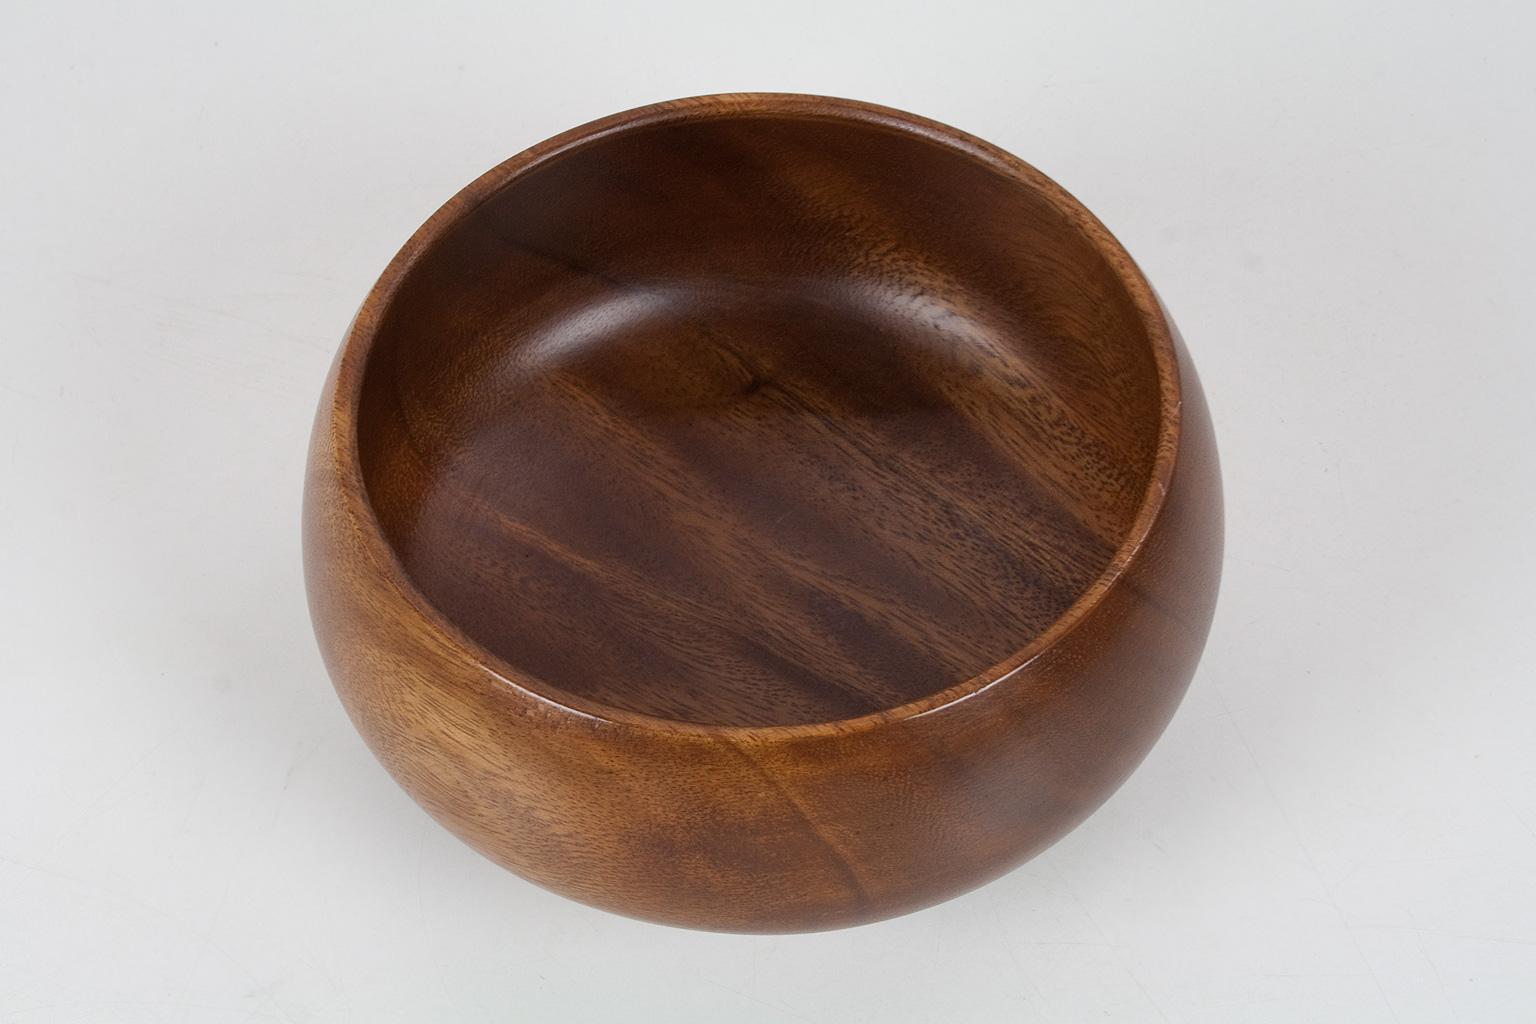 Elegant Danish decorative sculptural and hand made teak bowl on a refined classical foot, mid-sized 20cm / 7.8 inch. Beautiful table piece in excellent condition made of 6 mm thick teak wood, originated in Denmark, 1960s.

This object is carefully